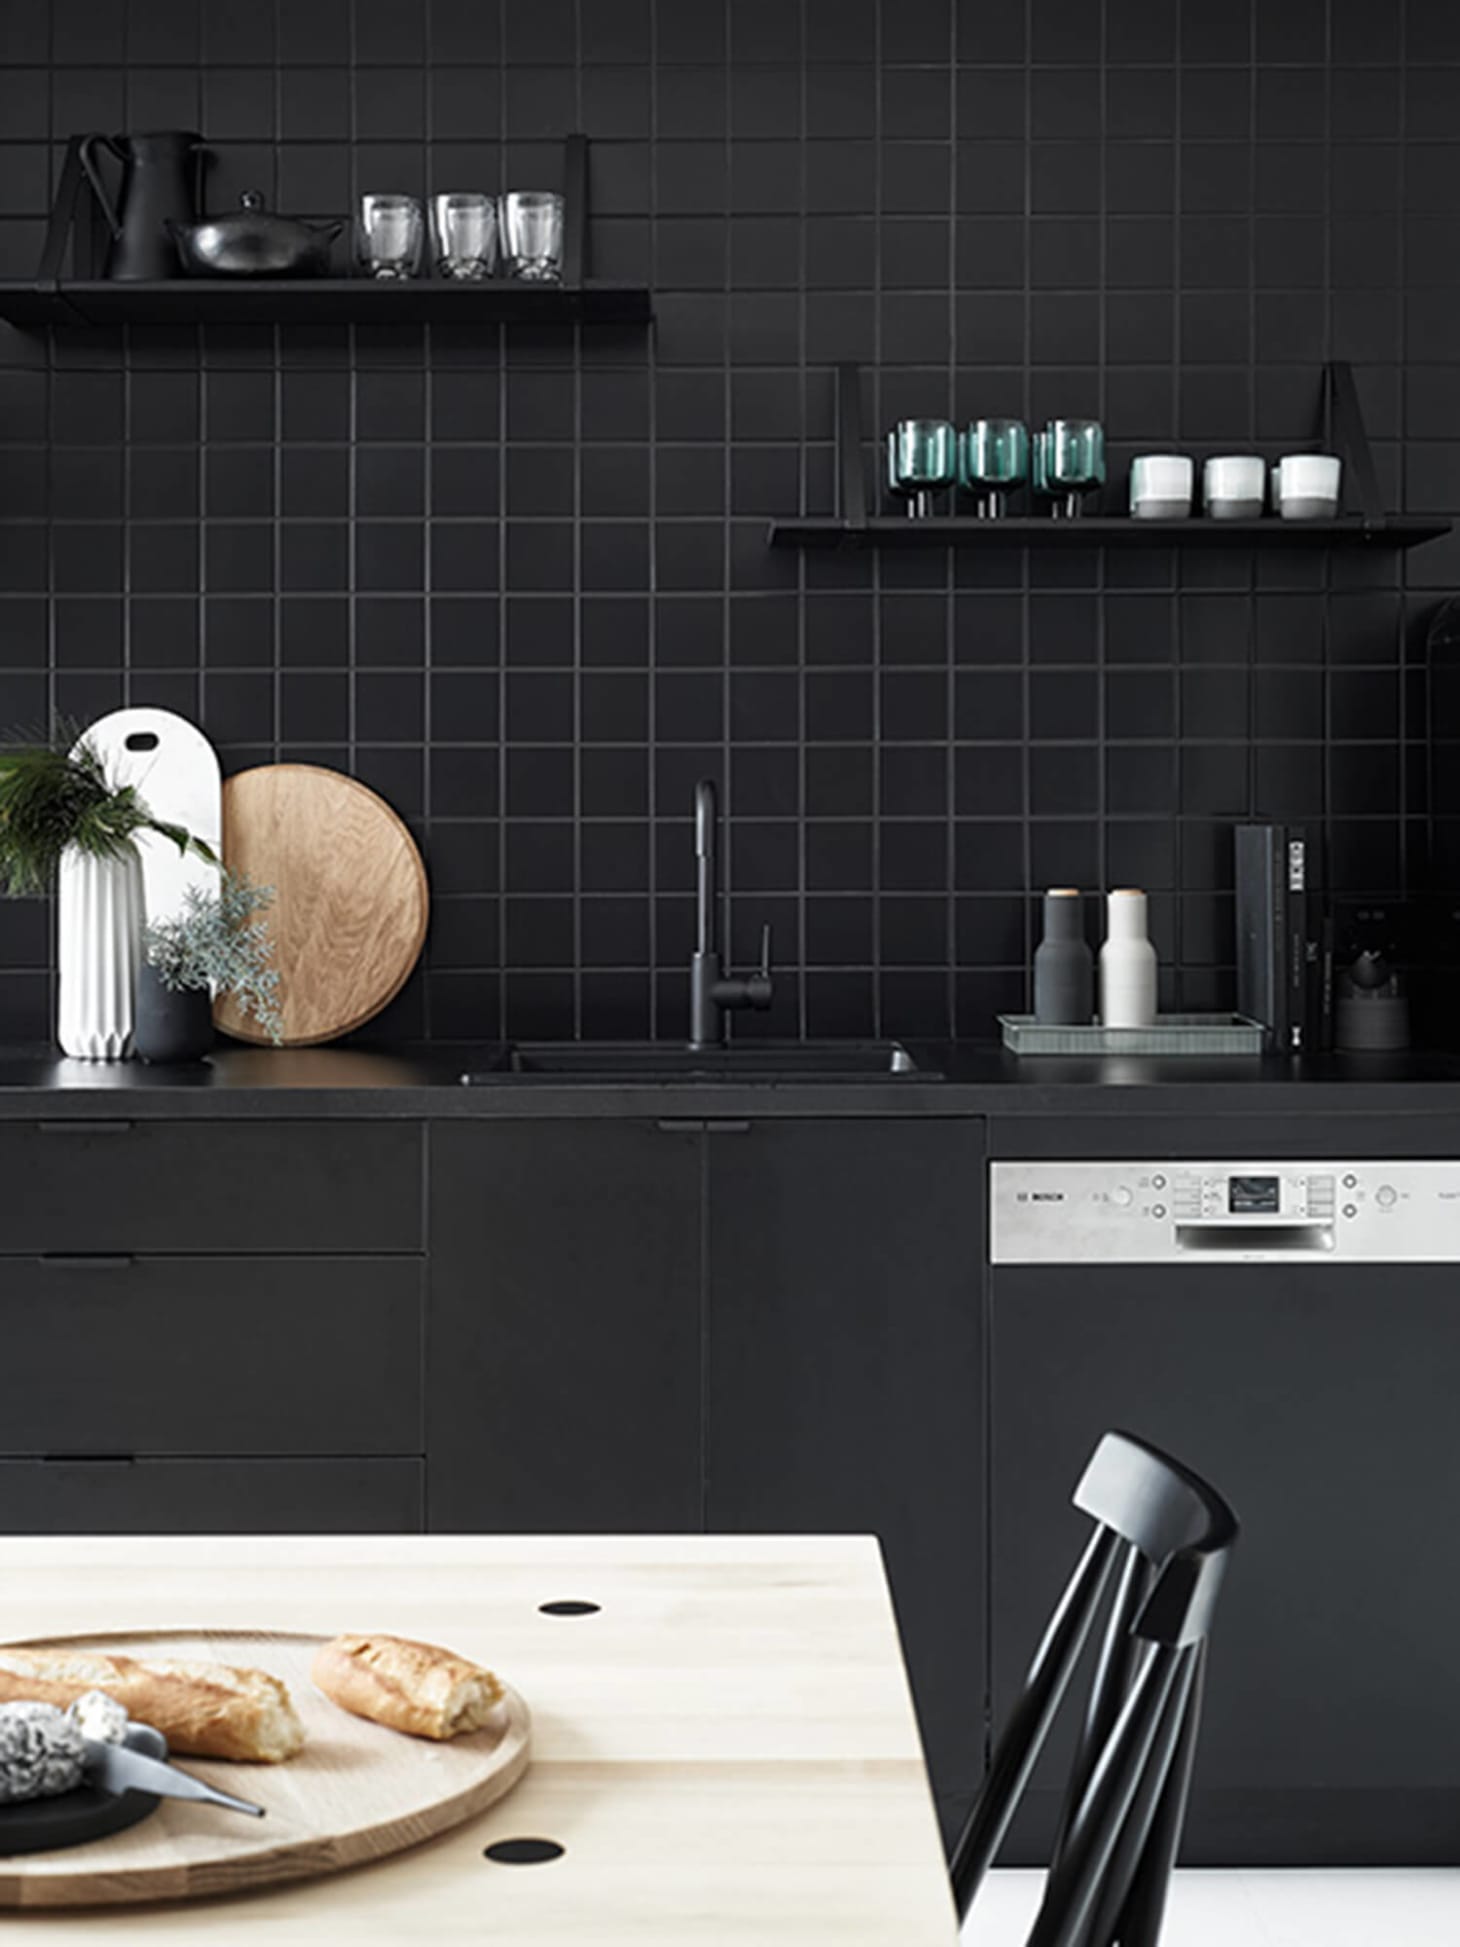 Kitchen Trend We Love: Black Tiles with Black Grout | Apartment Therapy